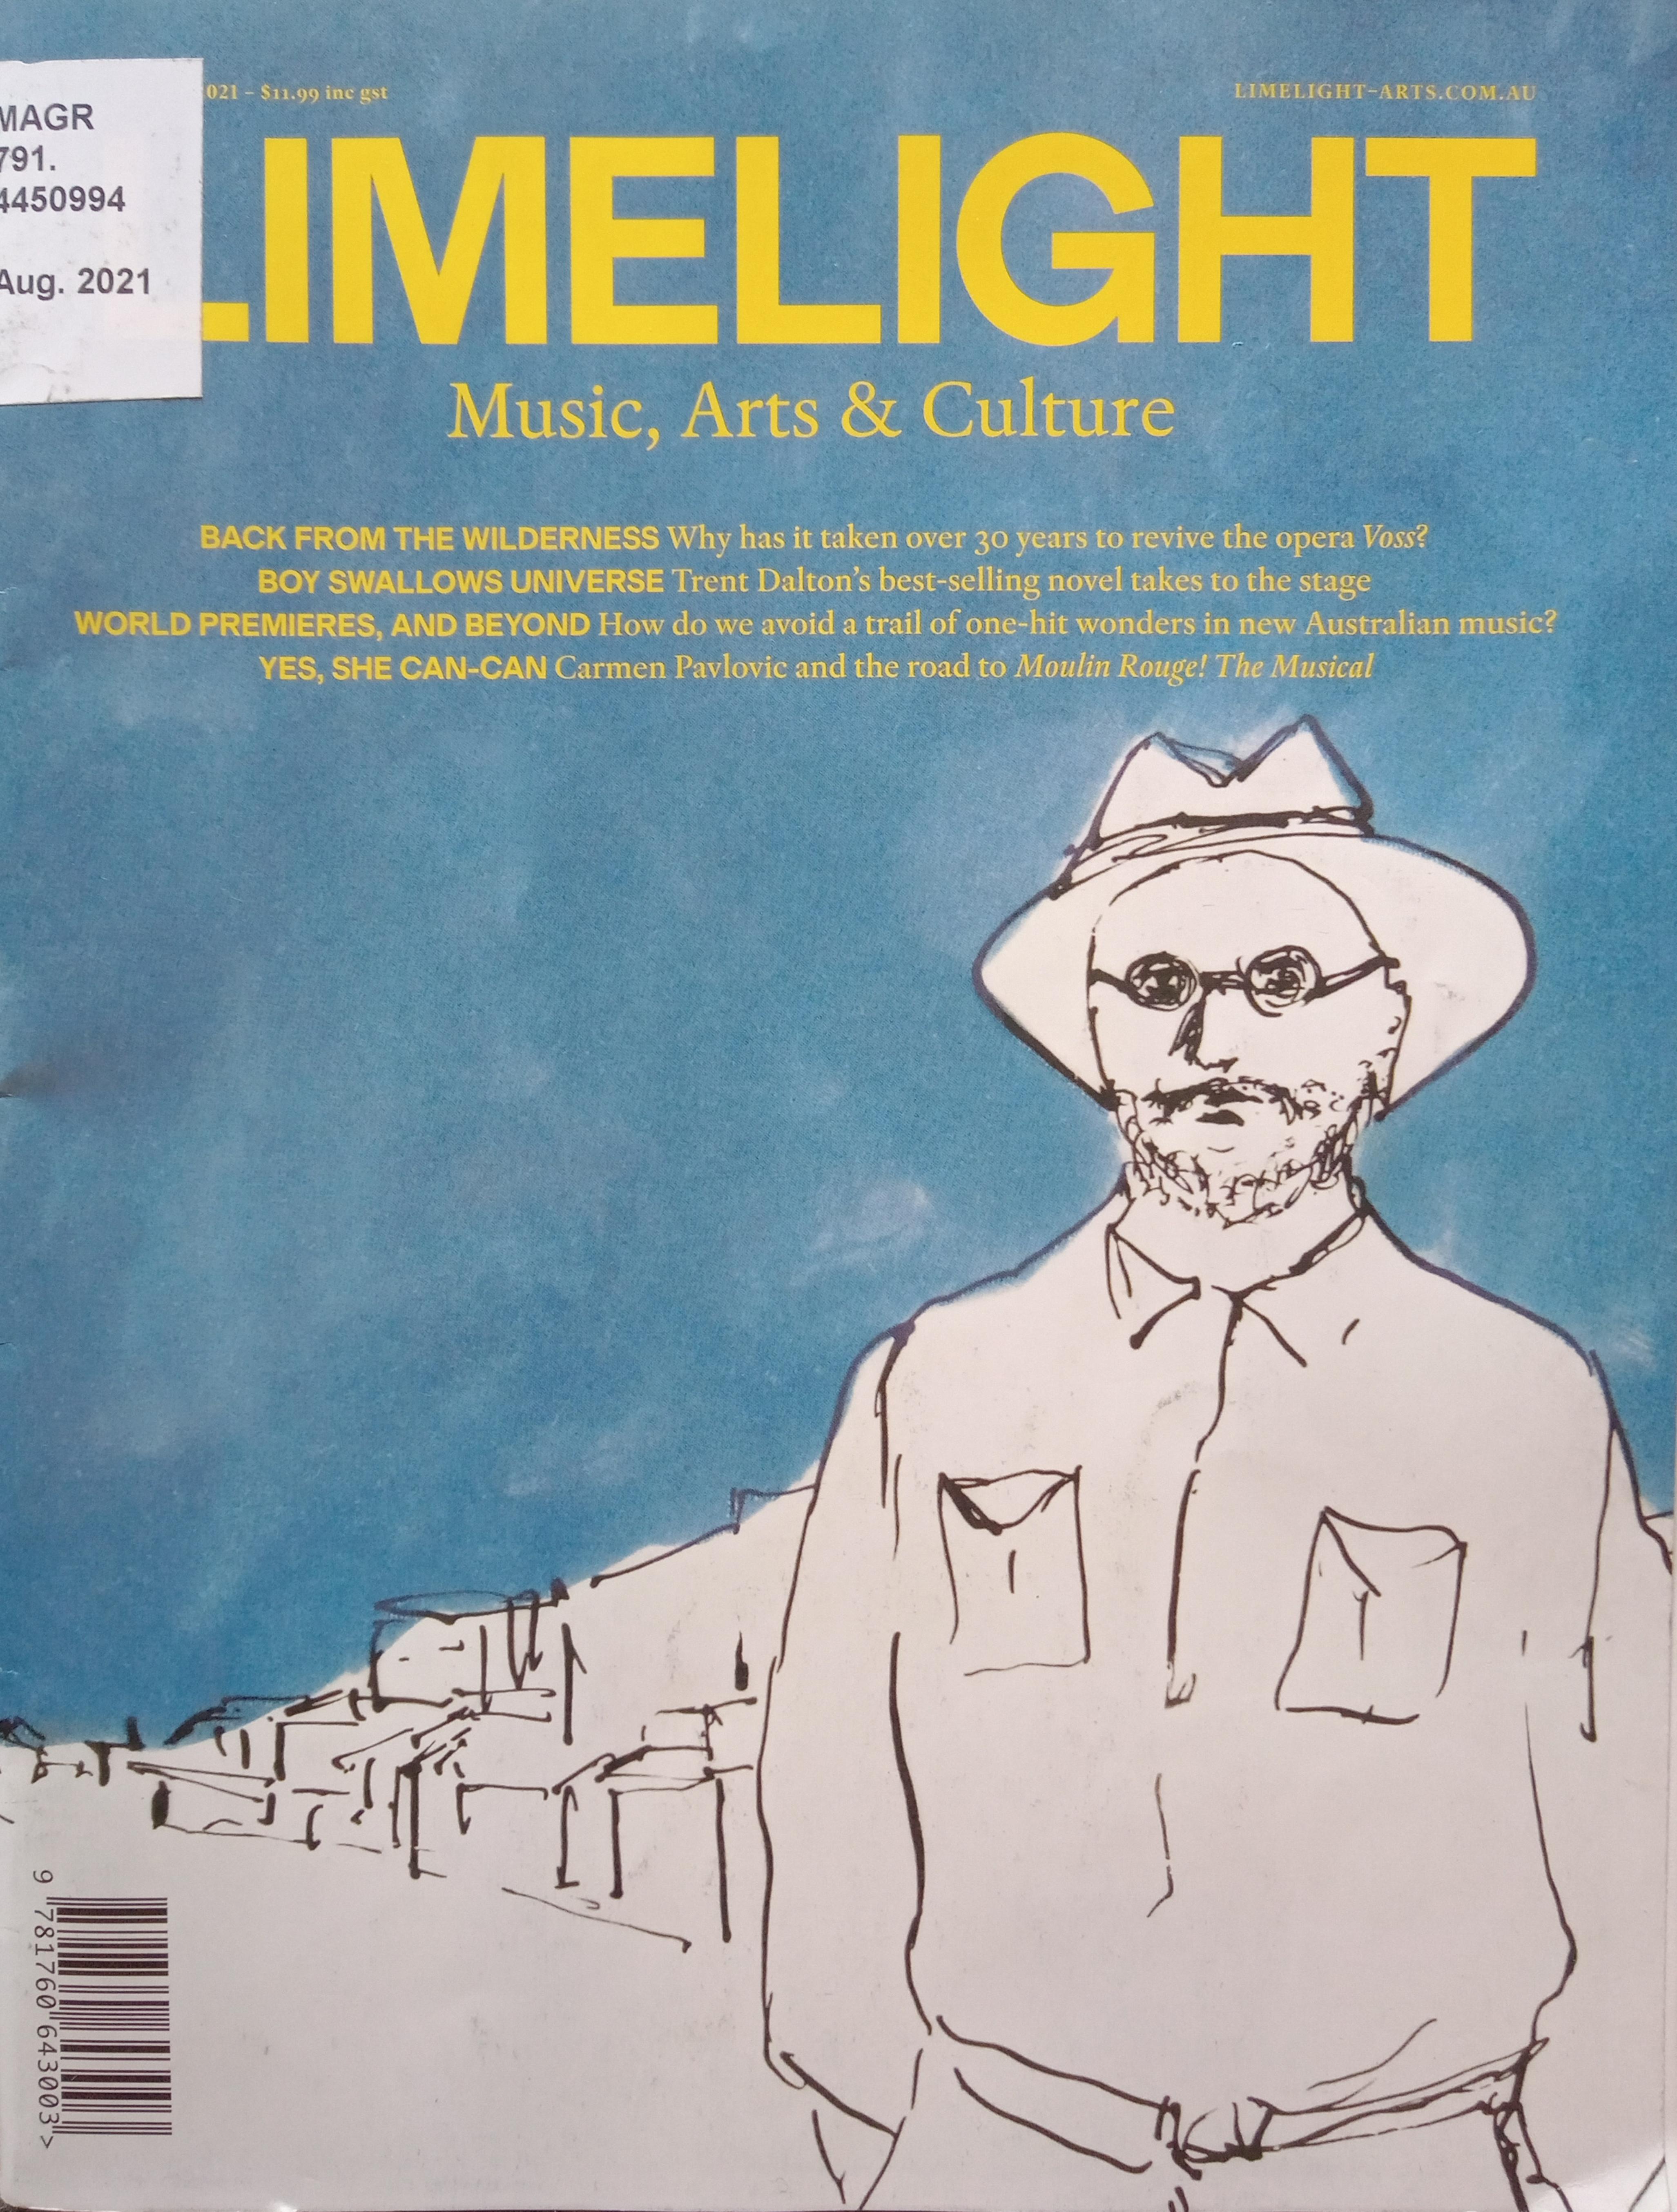 Front cover of "Limelight" magazine with line drawing of a man, August 2021